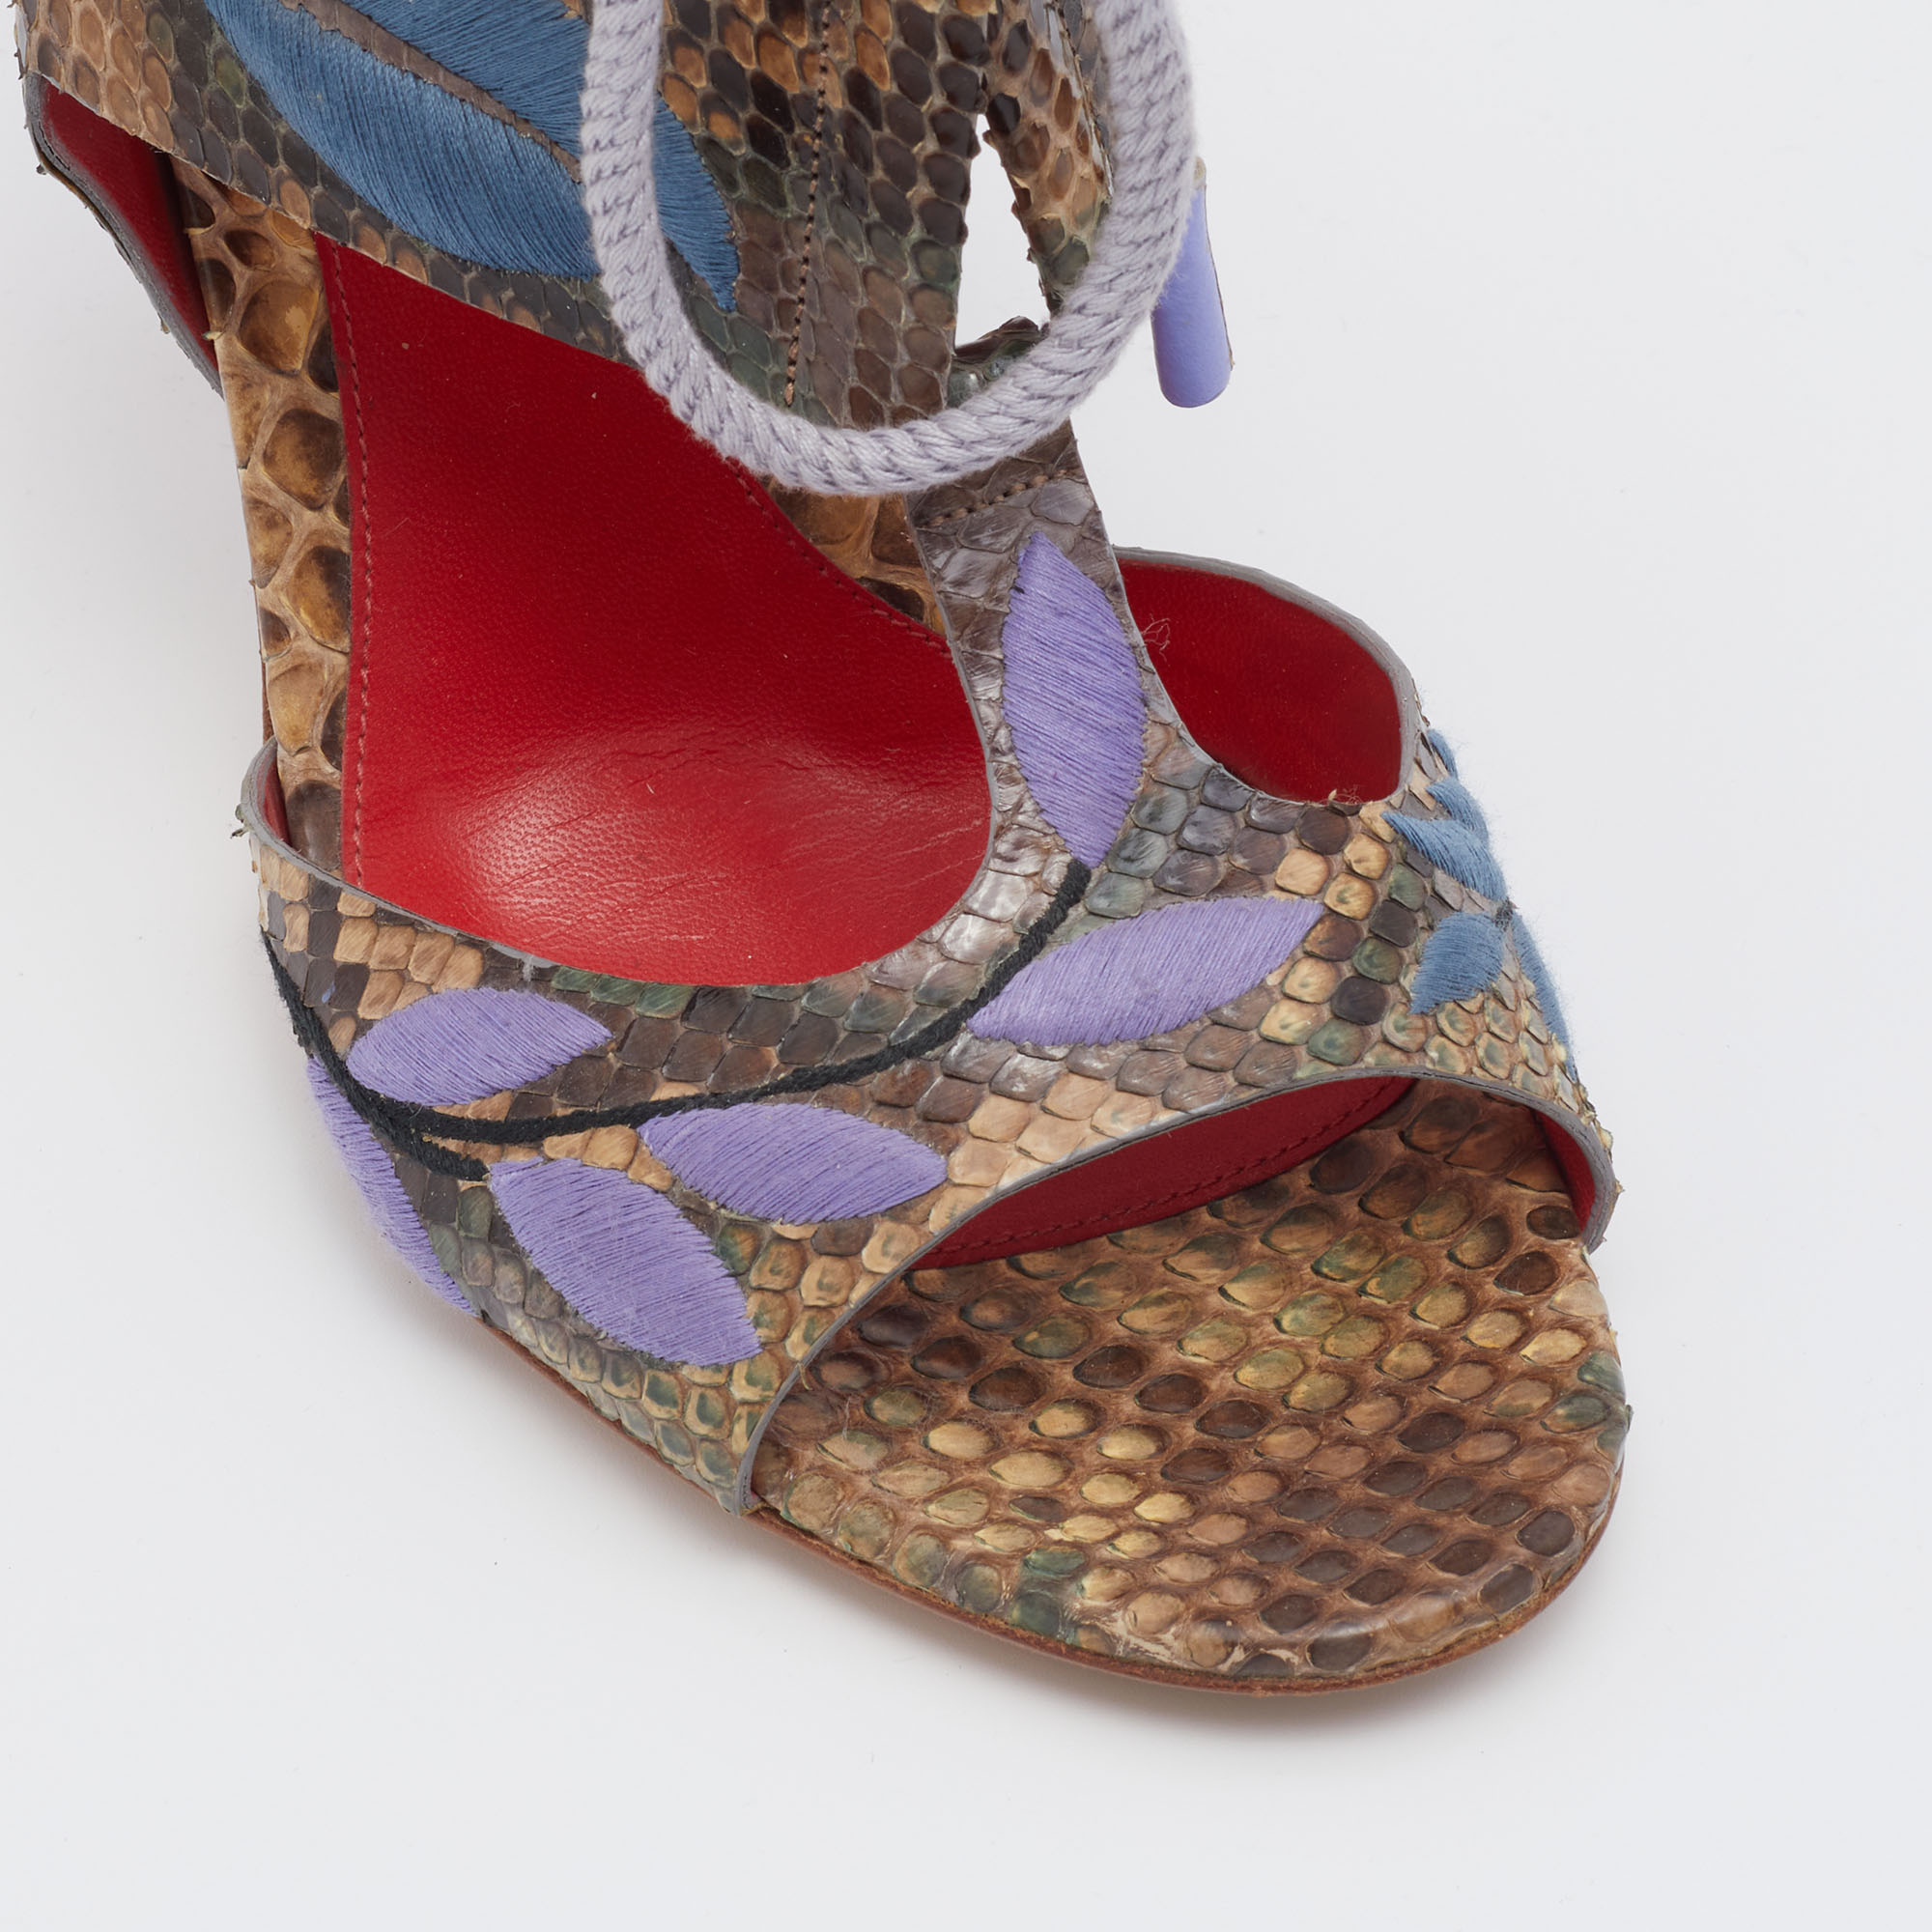 Sergio Rossi Multicolor Embroidered Python Ankle Tie Up Sandals Size 40